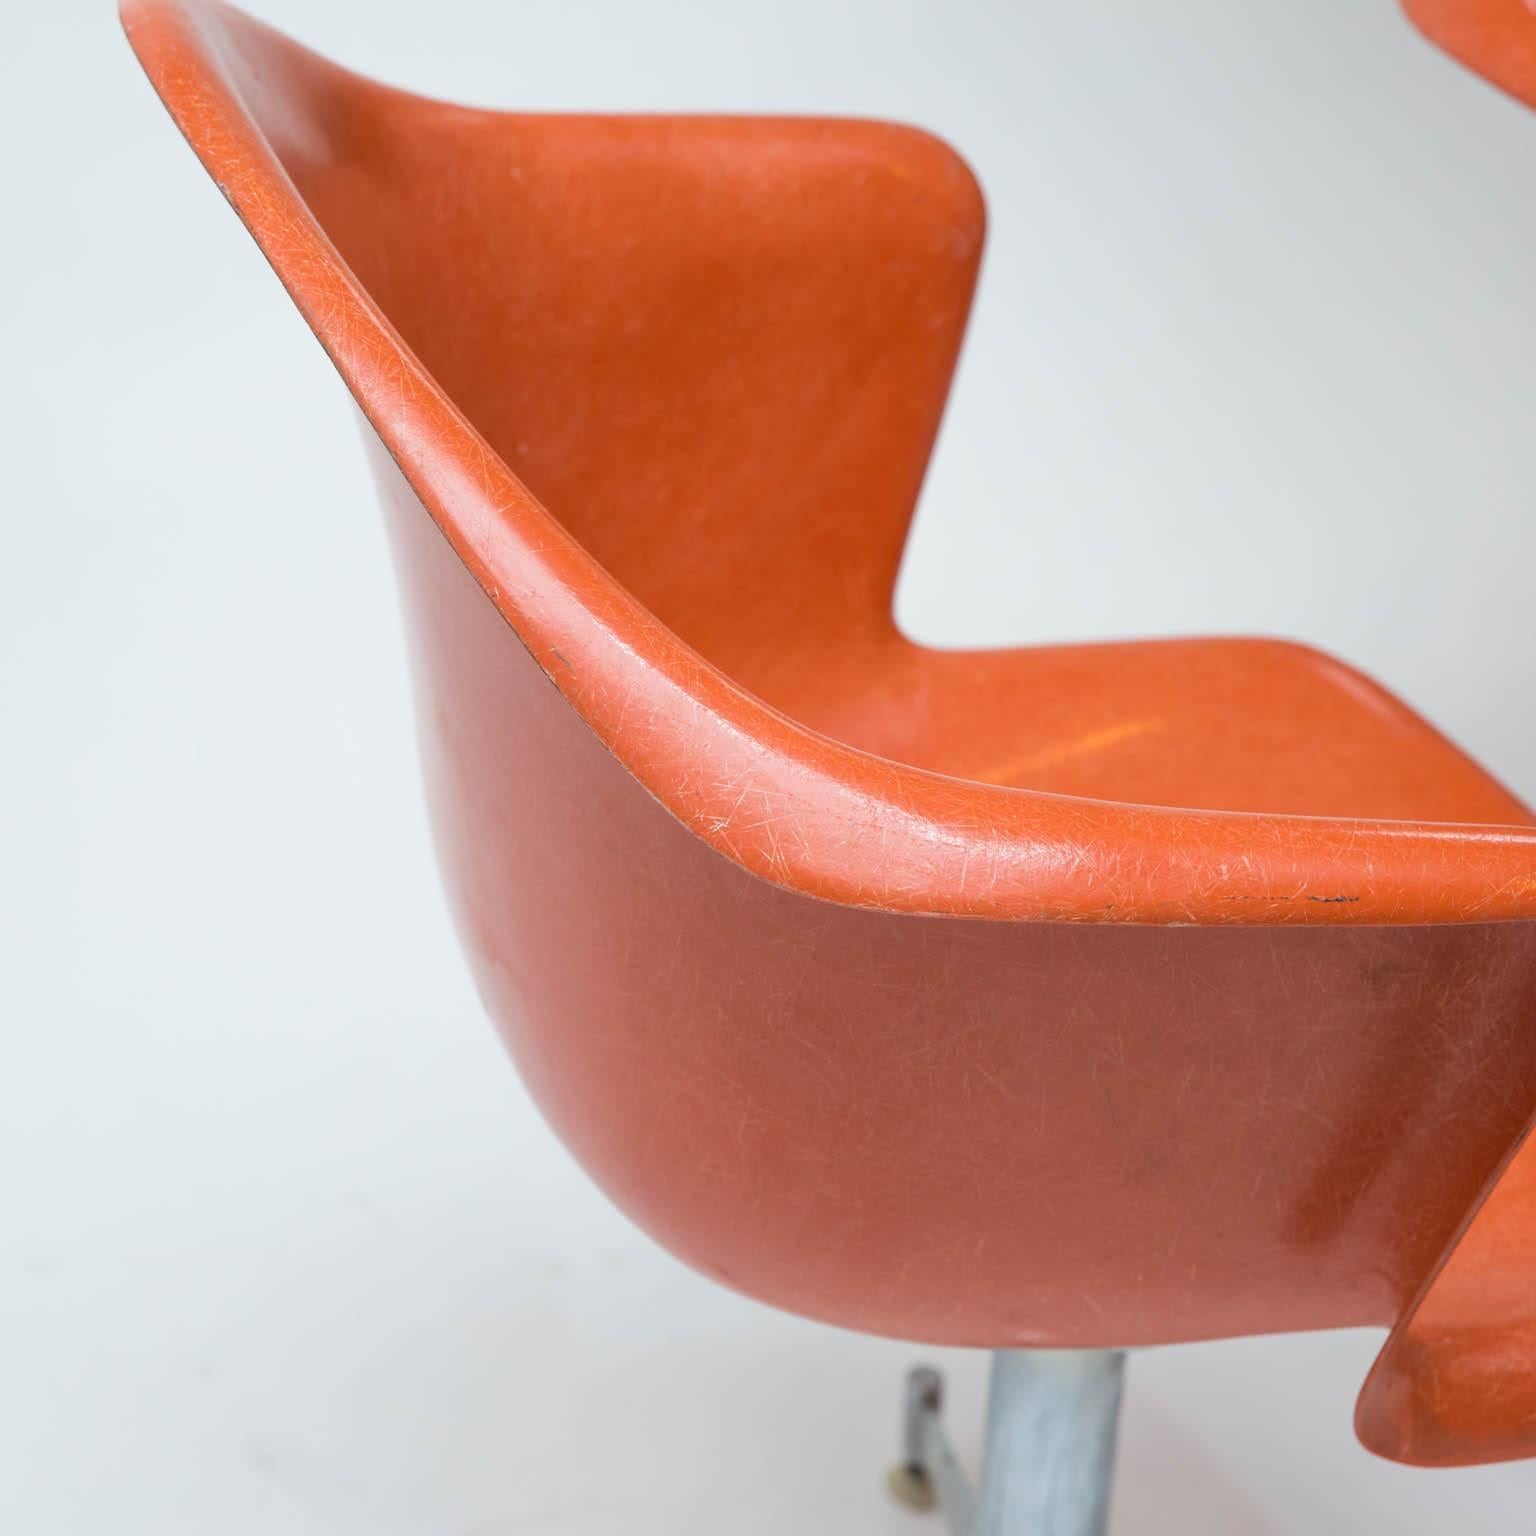 Made by the Douglass Furniture Company of El Segundo, California, these 1960s era chairs look pretty good for their age. Molded fiberglass season brushed aluminum swivel bases.